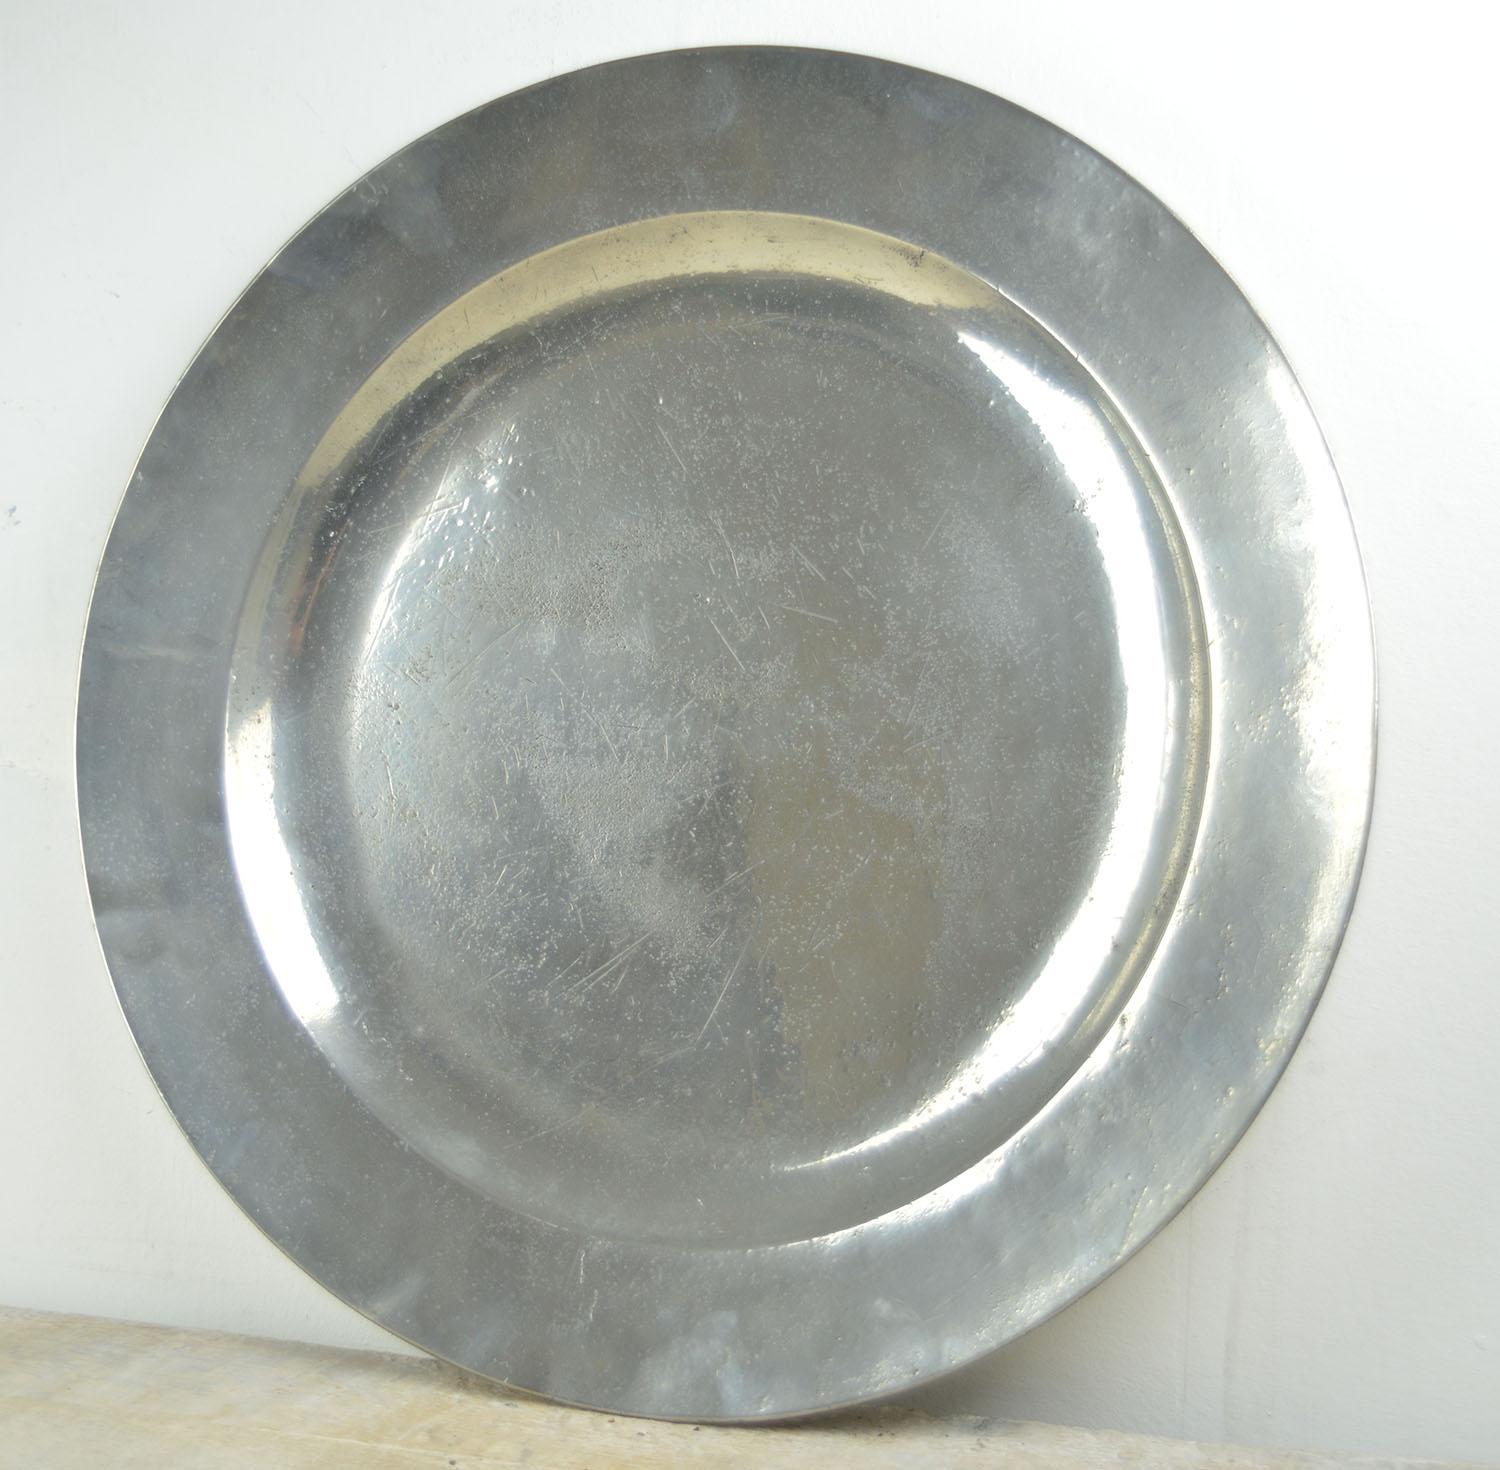 Wonderful highly polished chargers. A lovely distressed industrial look.

The pewter has been polished to its original shine. It was known as the Poor Man's Silver.

The great thing about polished pewter is that it will retain its shine unlike